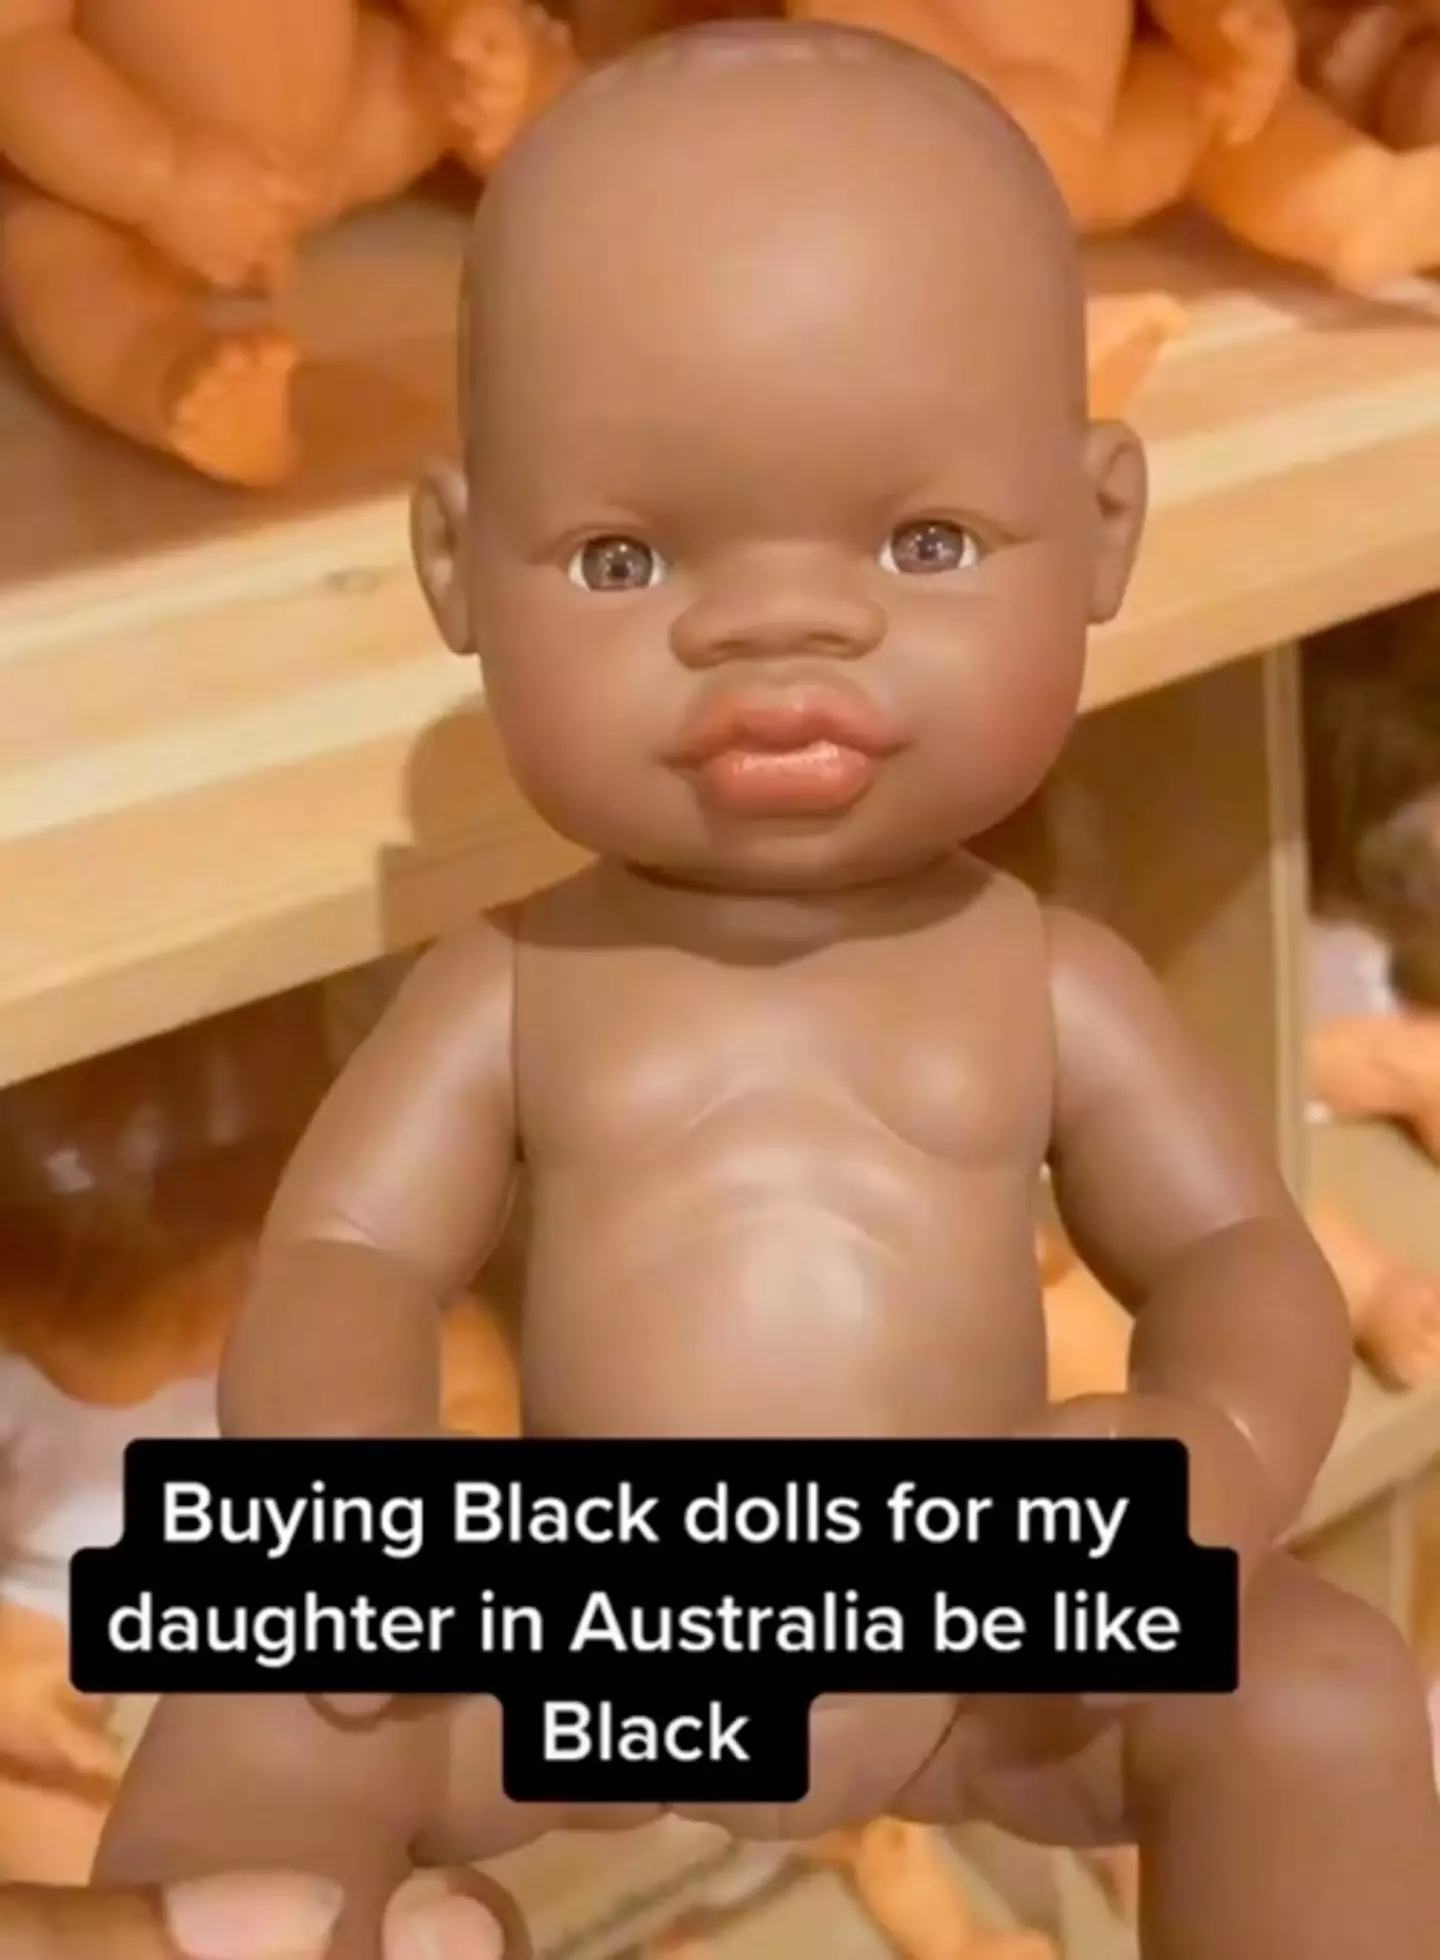 A woman criticised the design of a black doll she saw at a store in Australia.